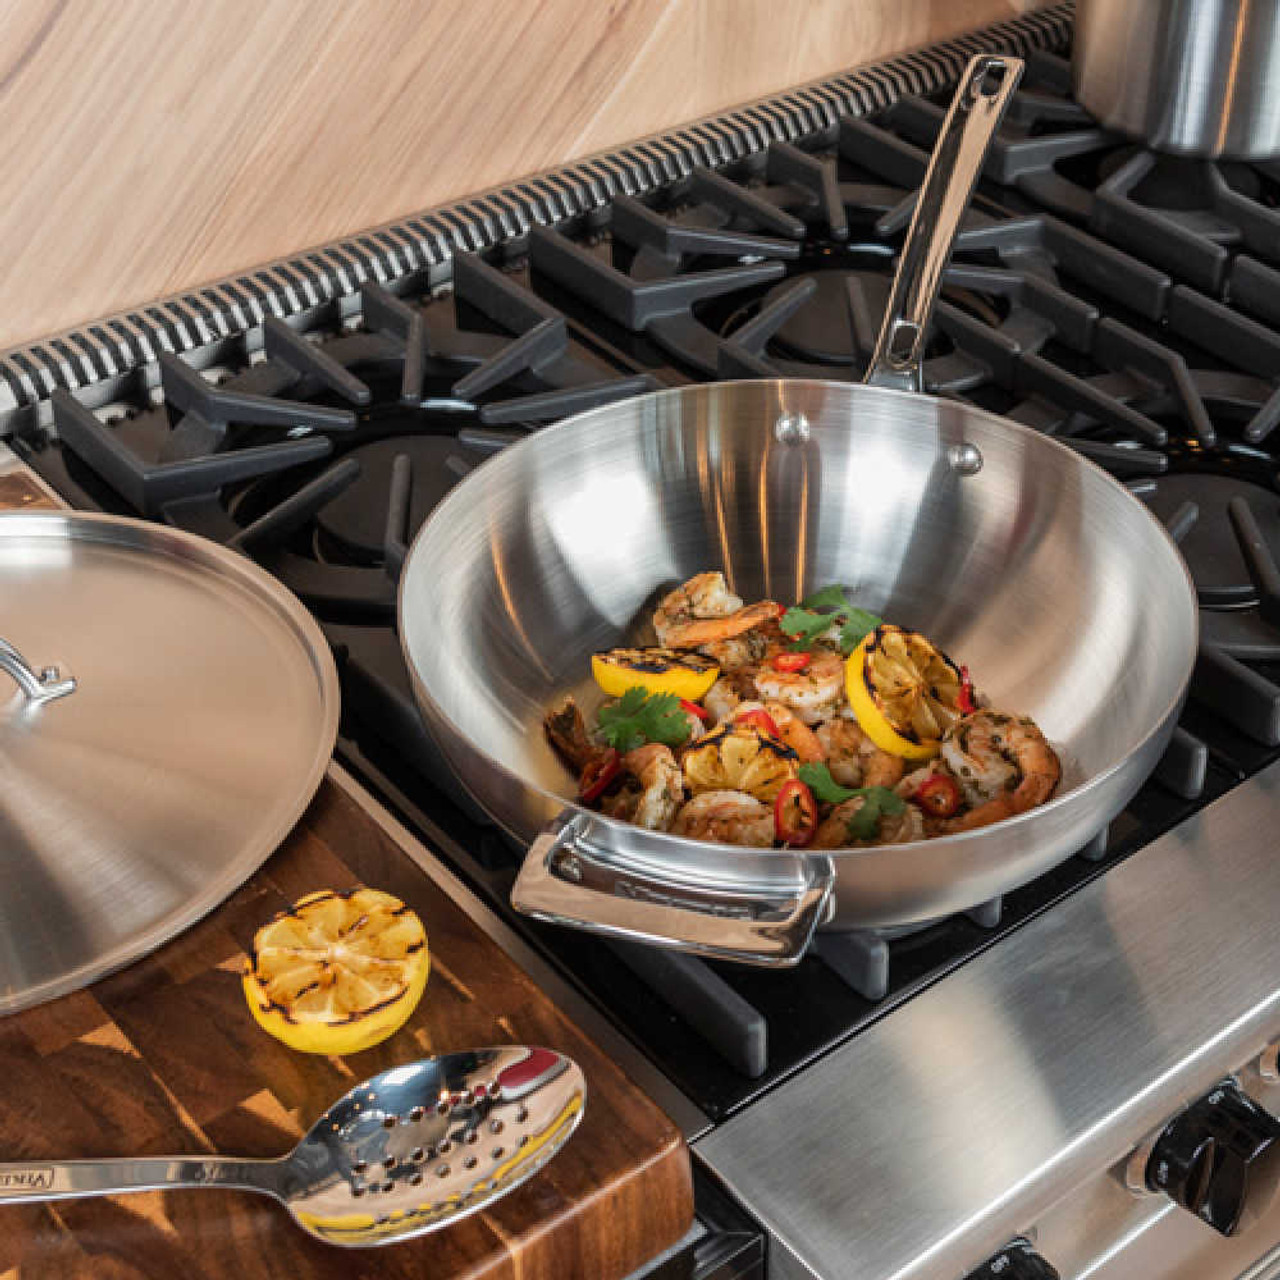 All-Clad 12 Stainless Steel Chef Pan Wok *Will Work on Induction Range  Stovetop